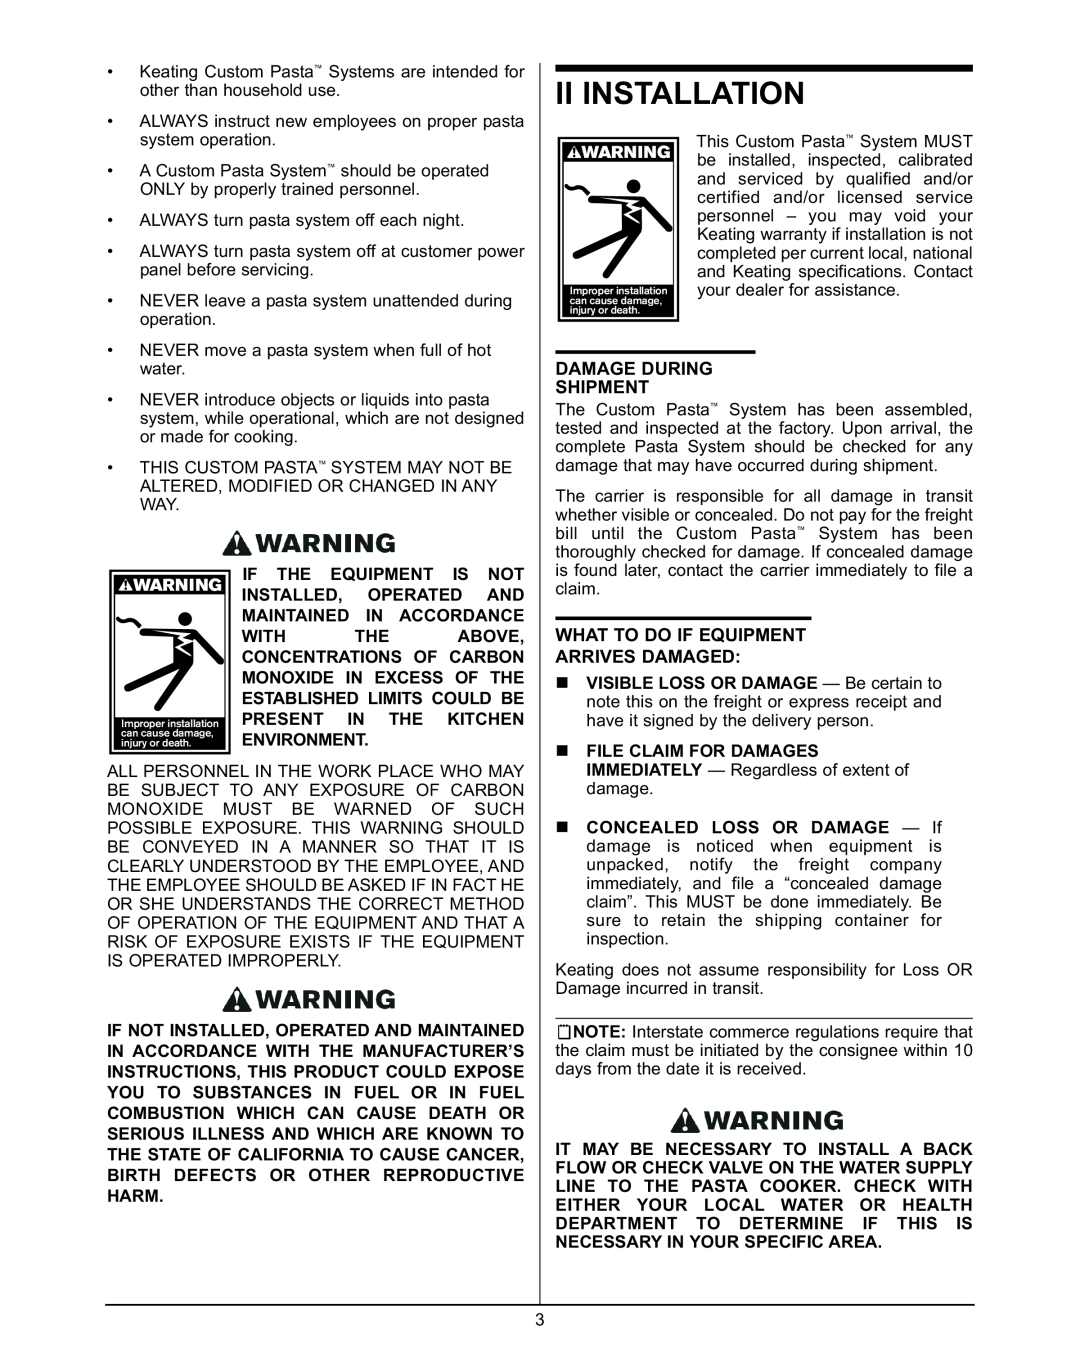 Keating Of Chicago 240V service manual Ii Installation, Damage During Shipment, What To Do If Equipment Arrives Damaged 